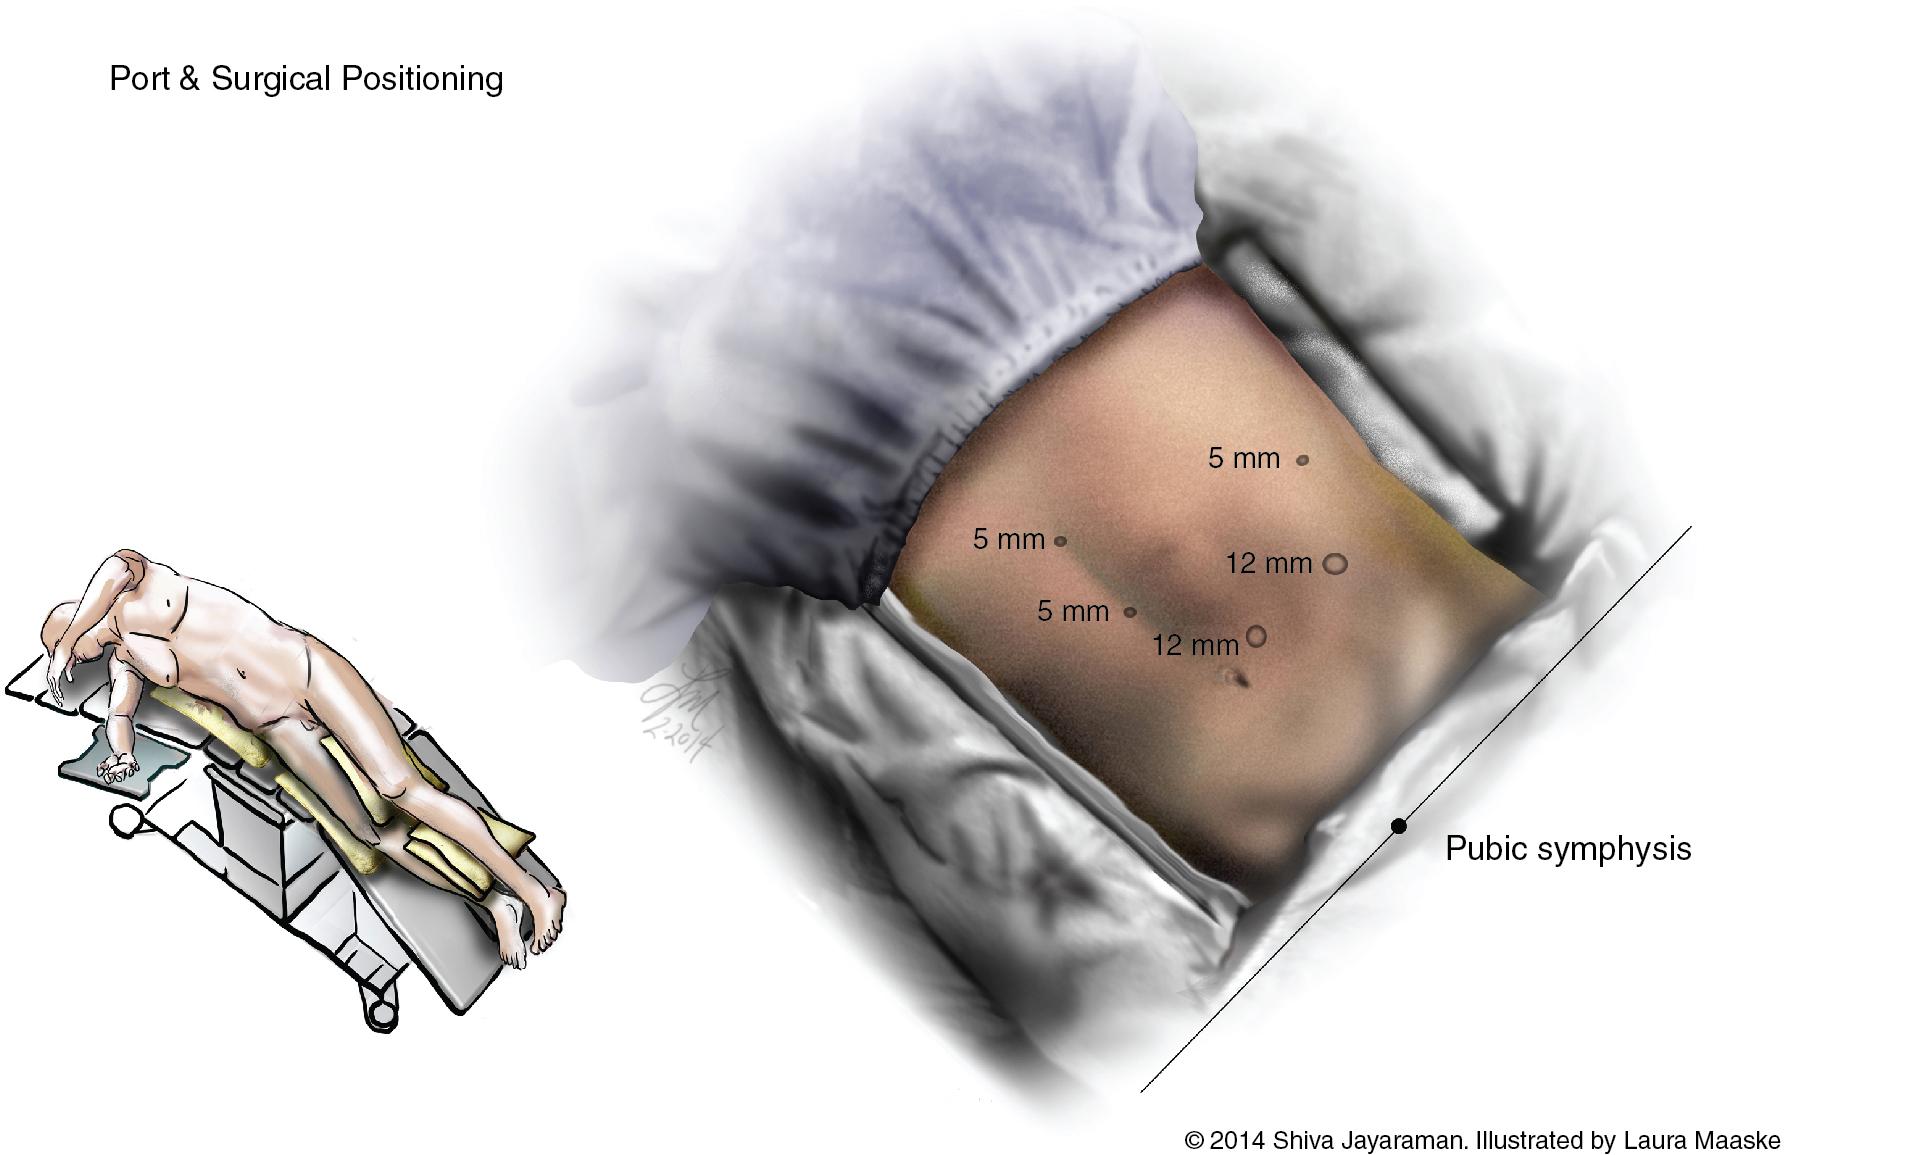 FIGURE 127B.1, Port placement and patient positioning for laparoscopic distal pancreatectomy.